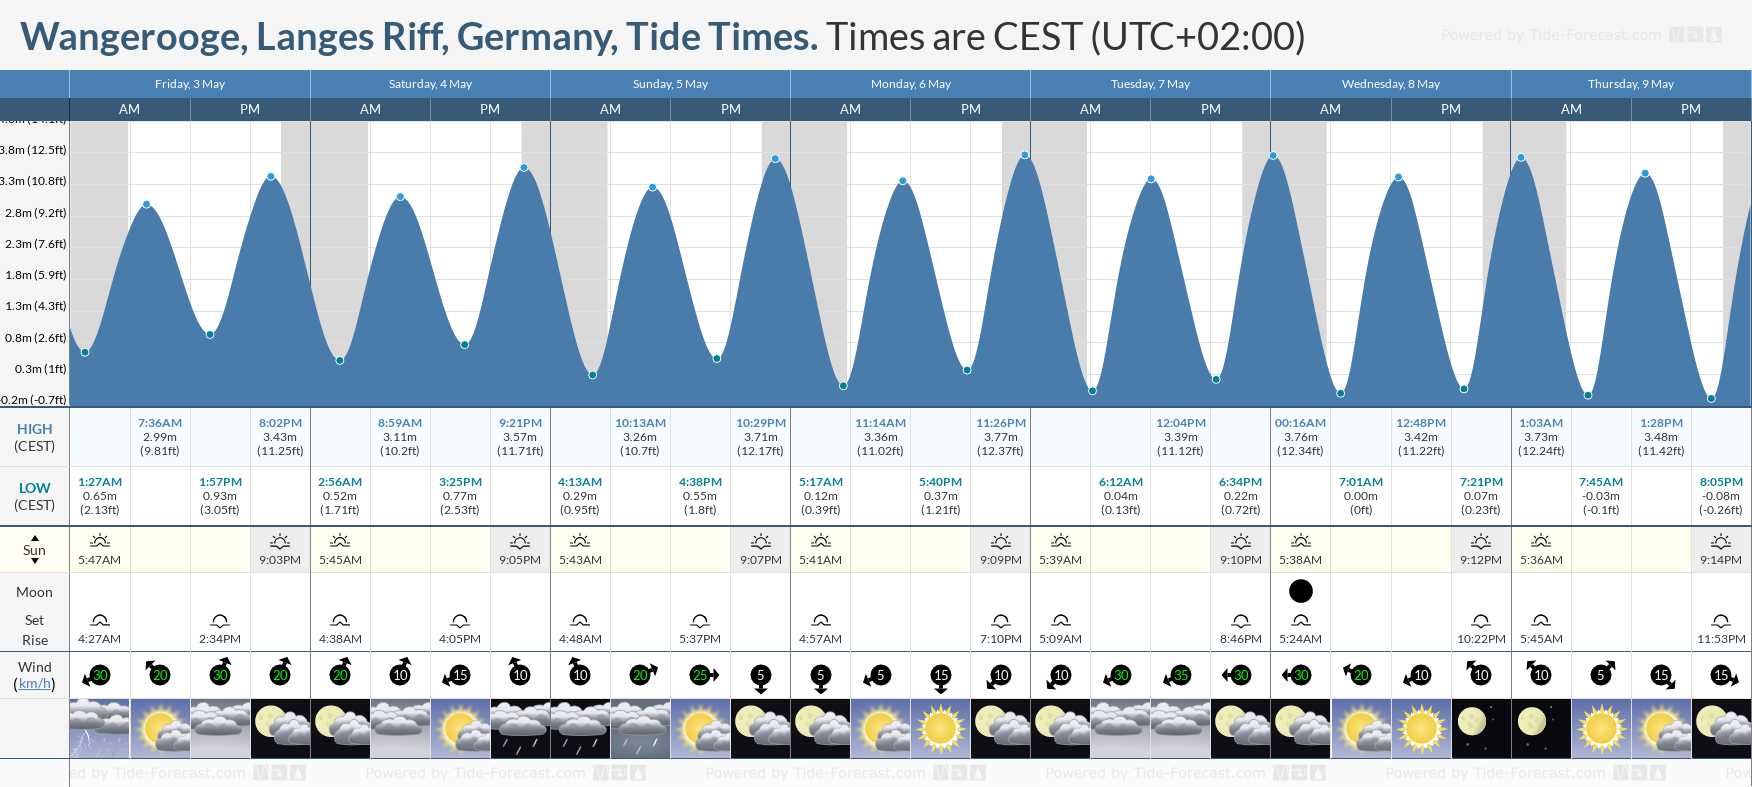 Wangerooge, Langes Riff, Germany Tide Chart including high and low tide tide times for the next 7 days